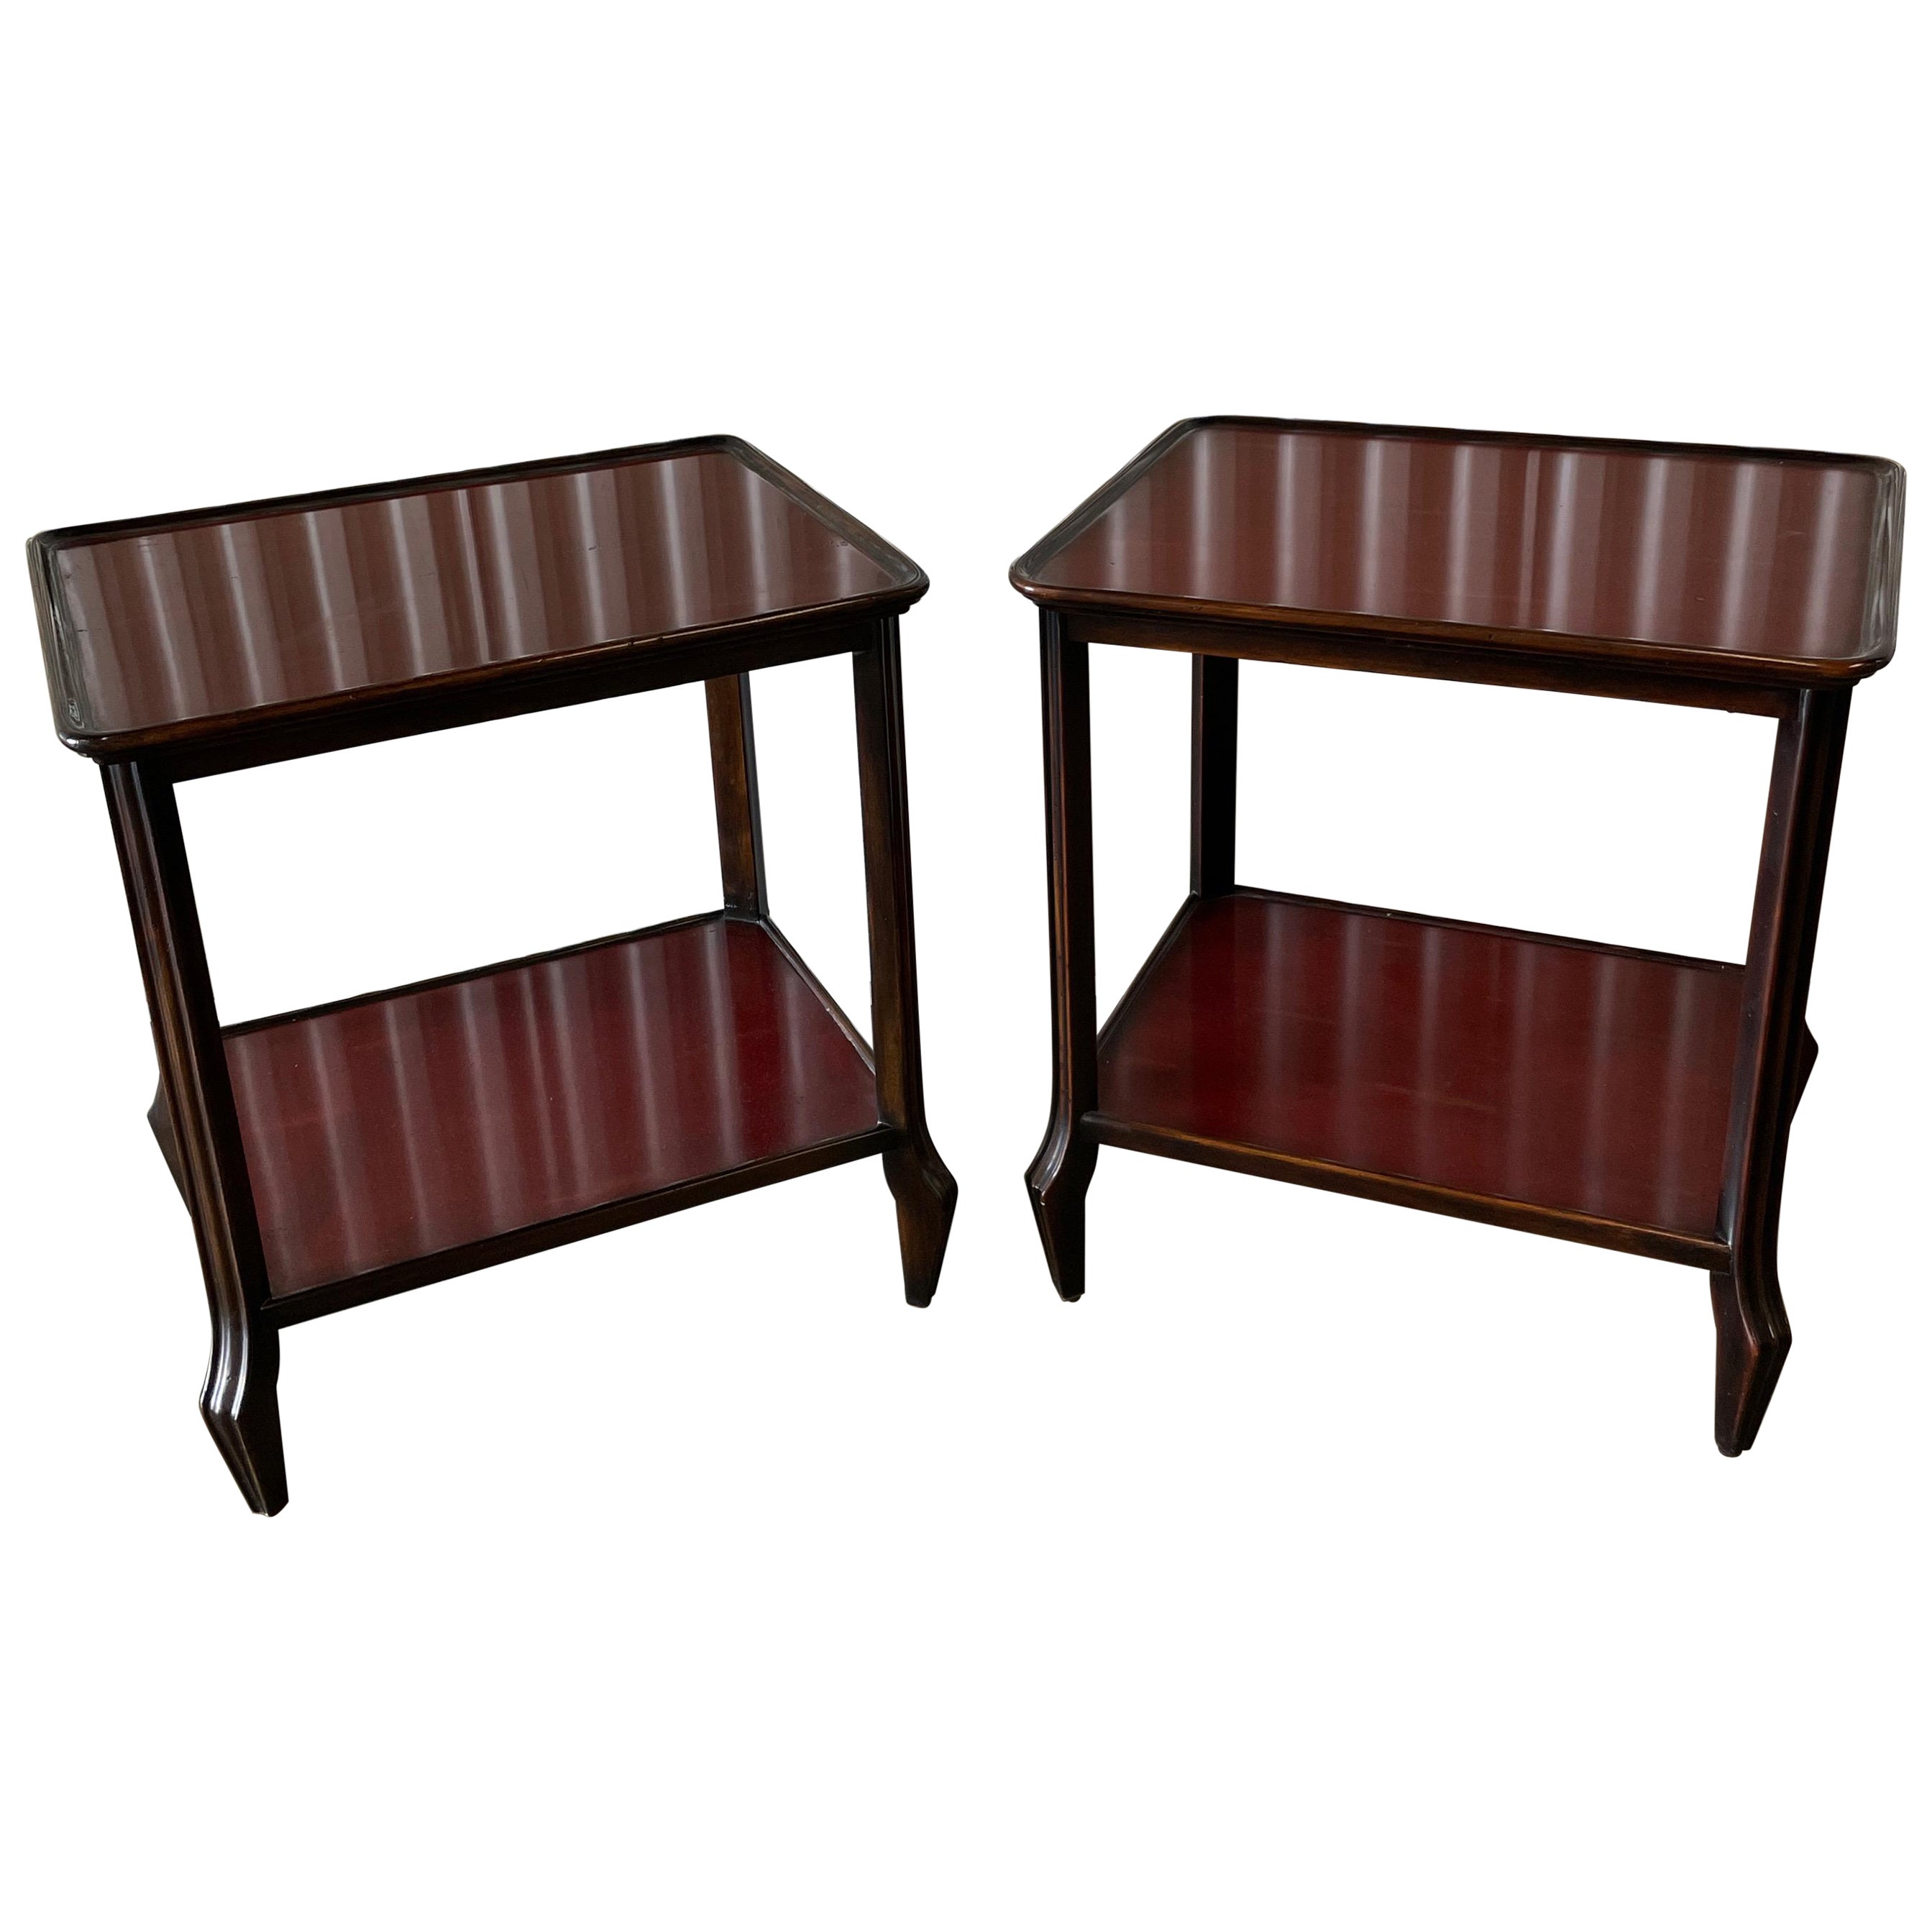 Pair of Two Tiered Country French Style Side Tables